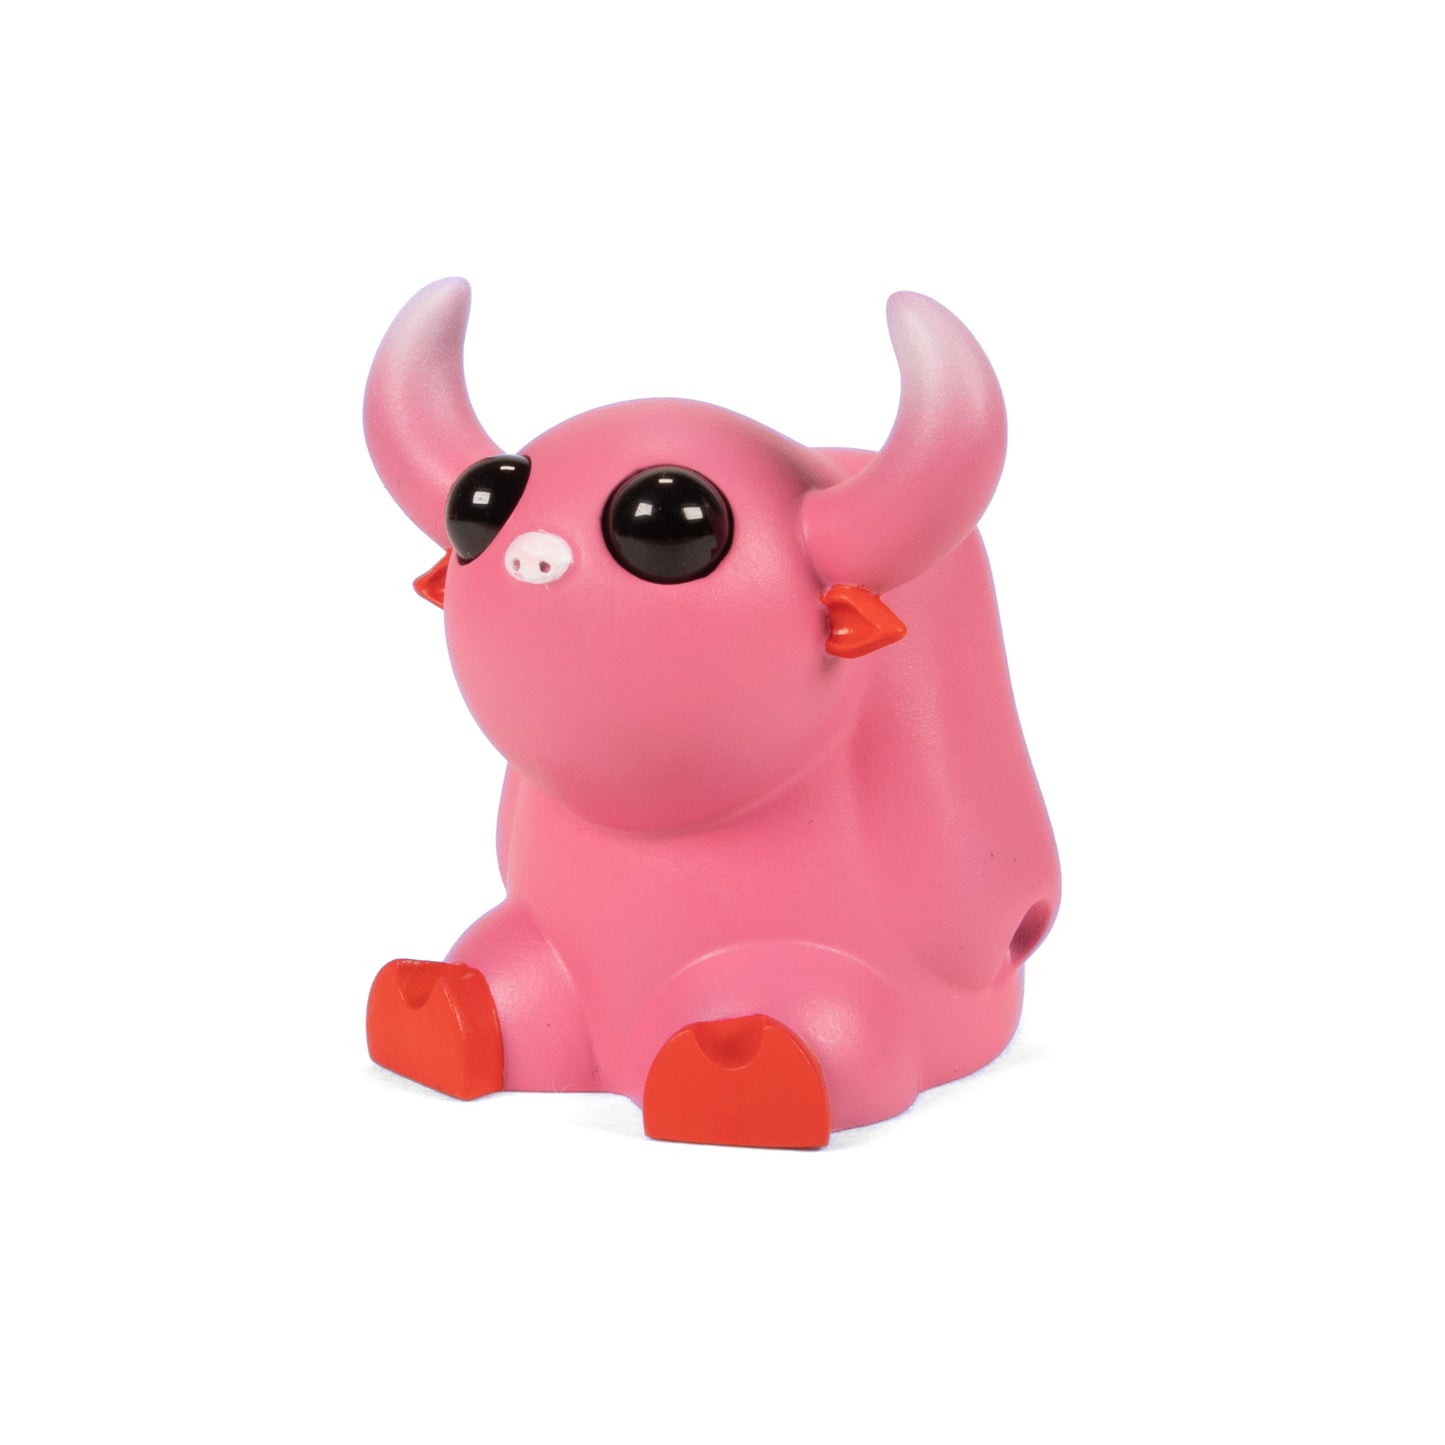 Clove the Bull Grazing For Love Limited Edition Hand-Painted Resin Figure